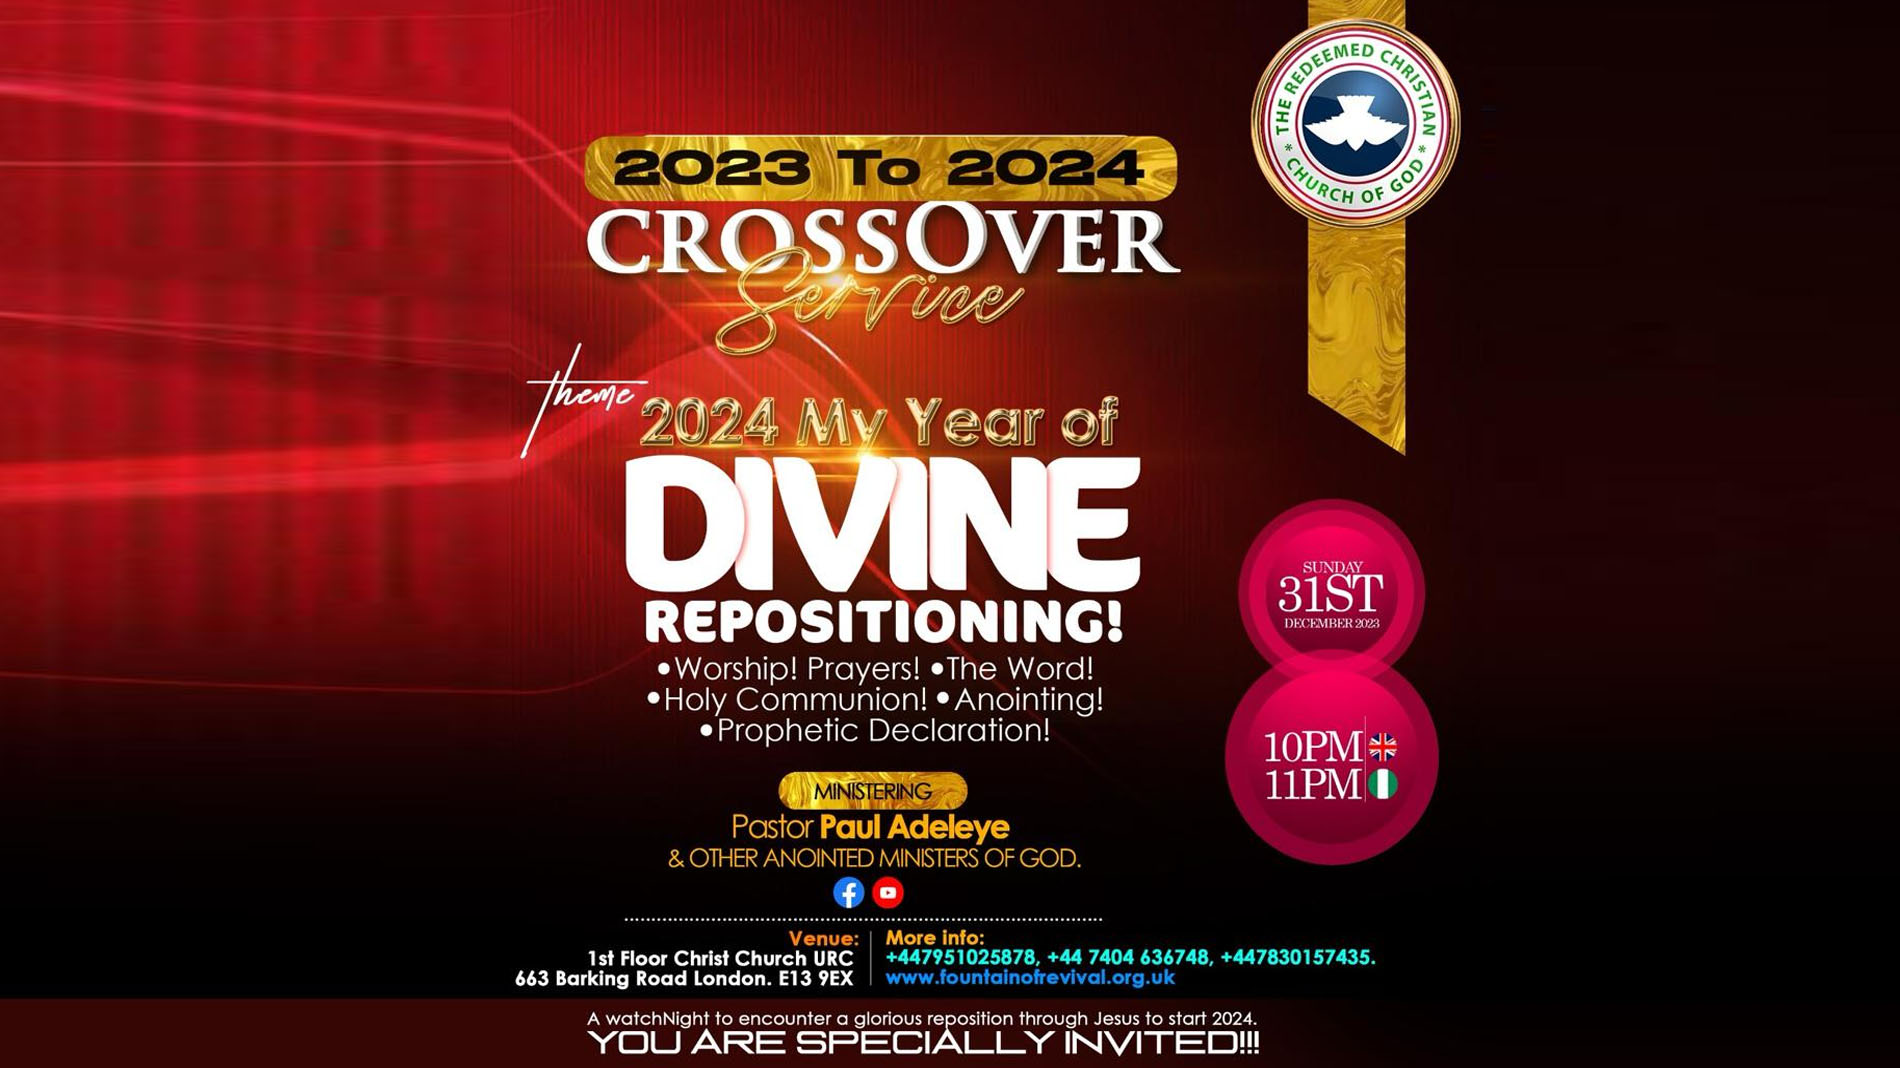 2024 My Year of Divine Repositioning!